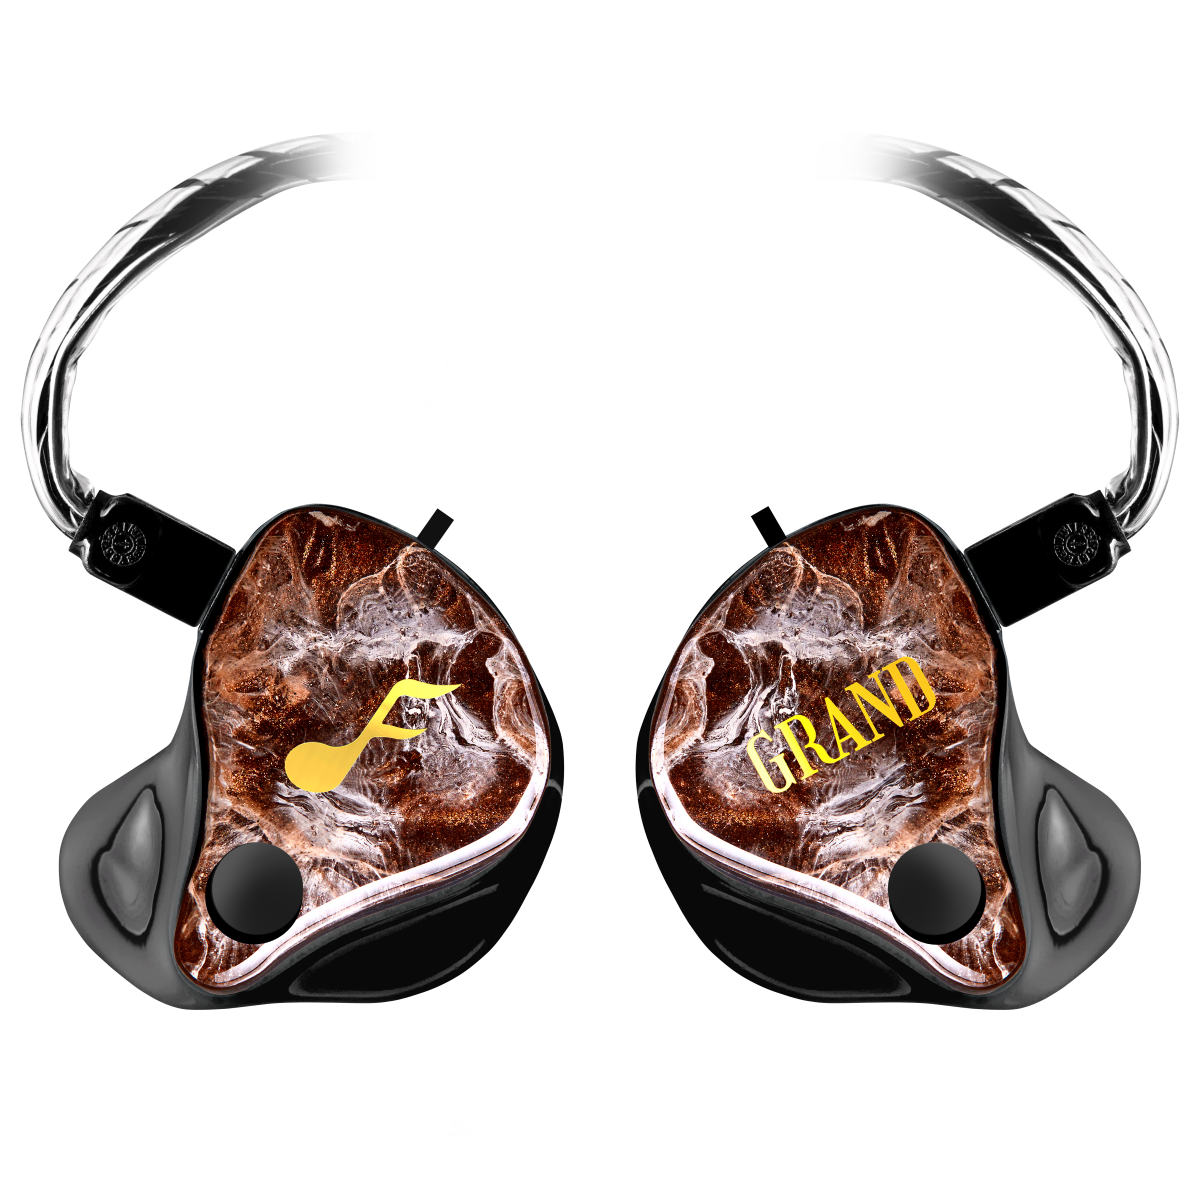 GRAND Maestro Custom IEM - Prices from 5581.00 to 5675.00